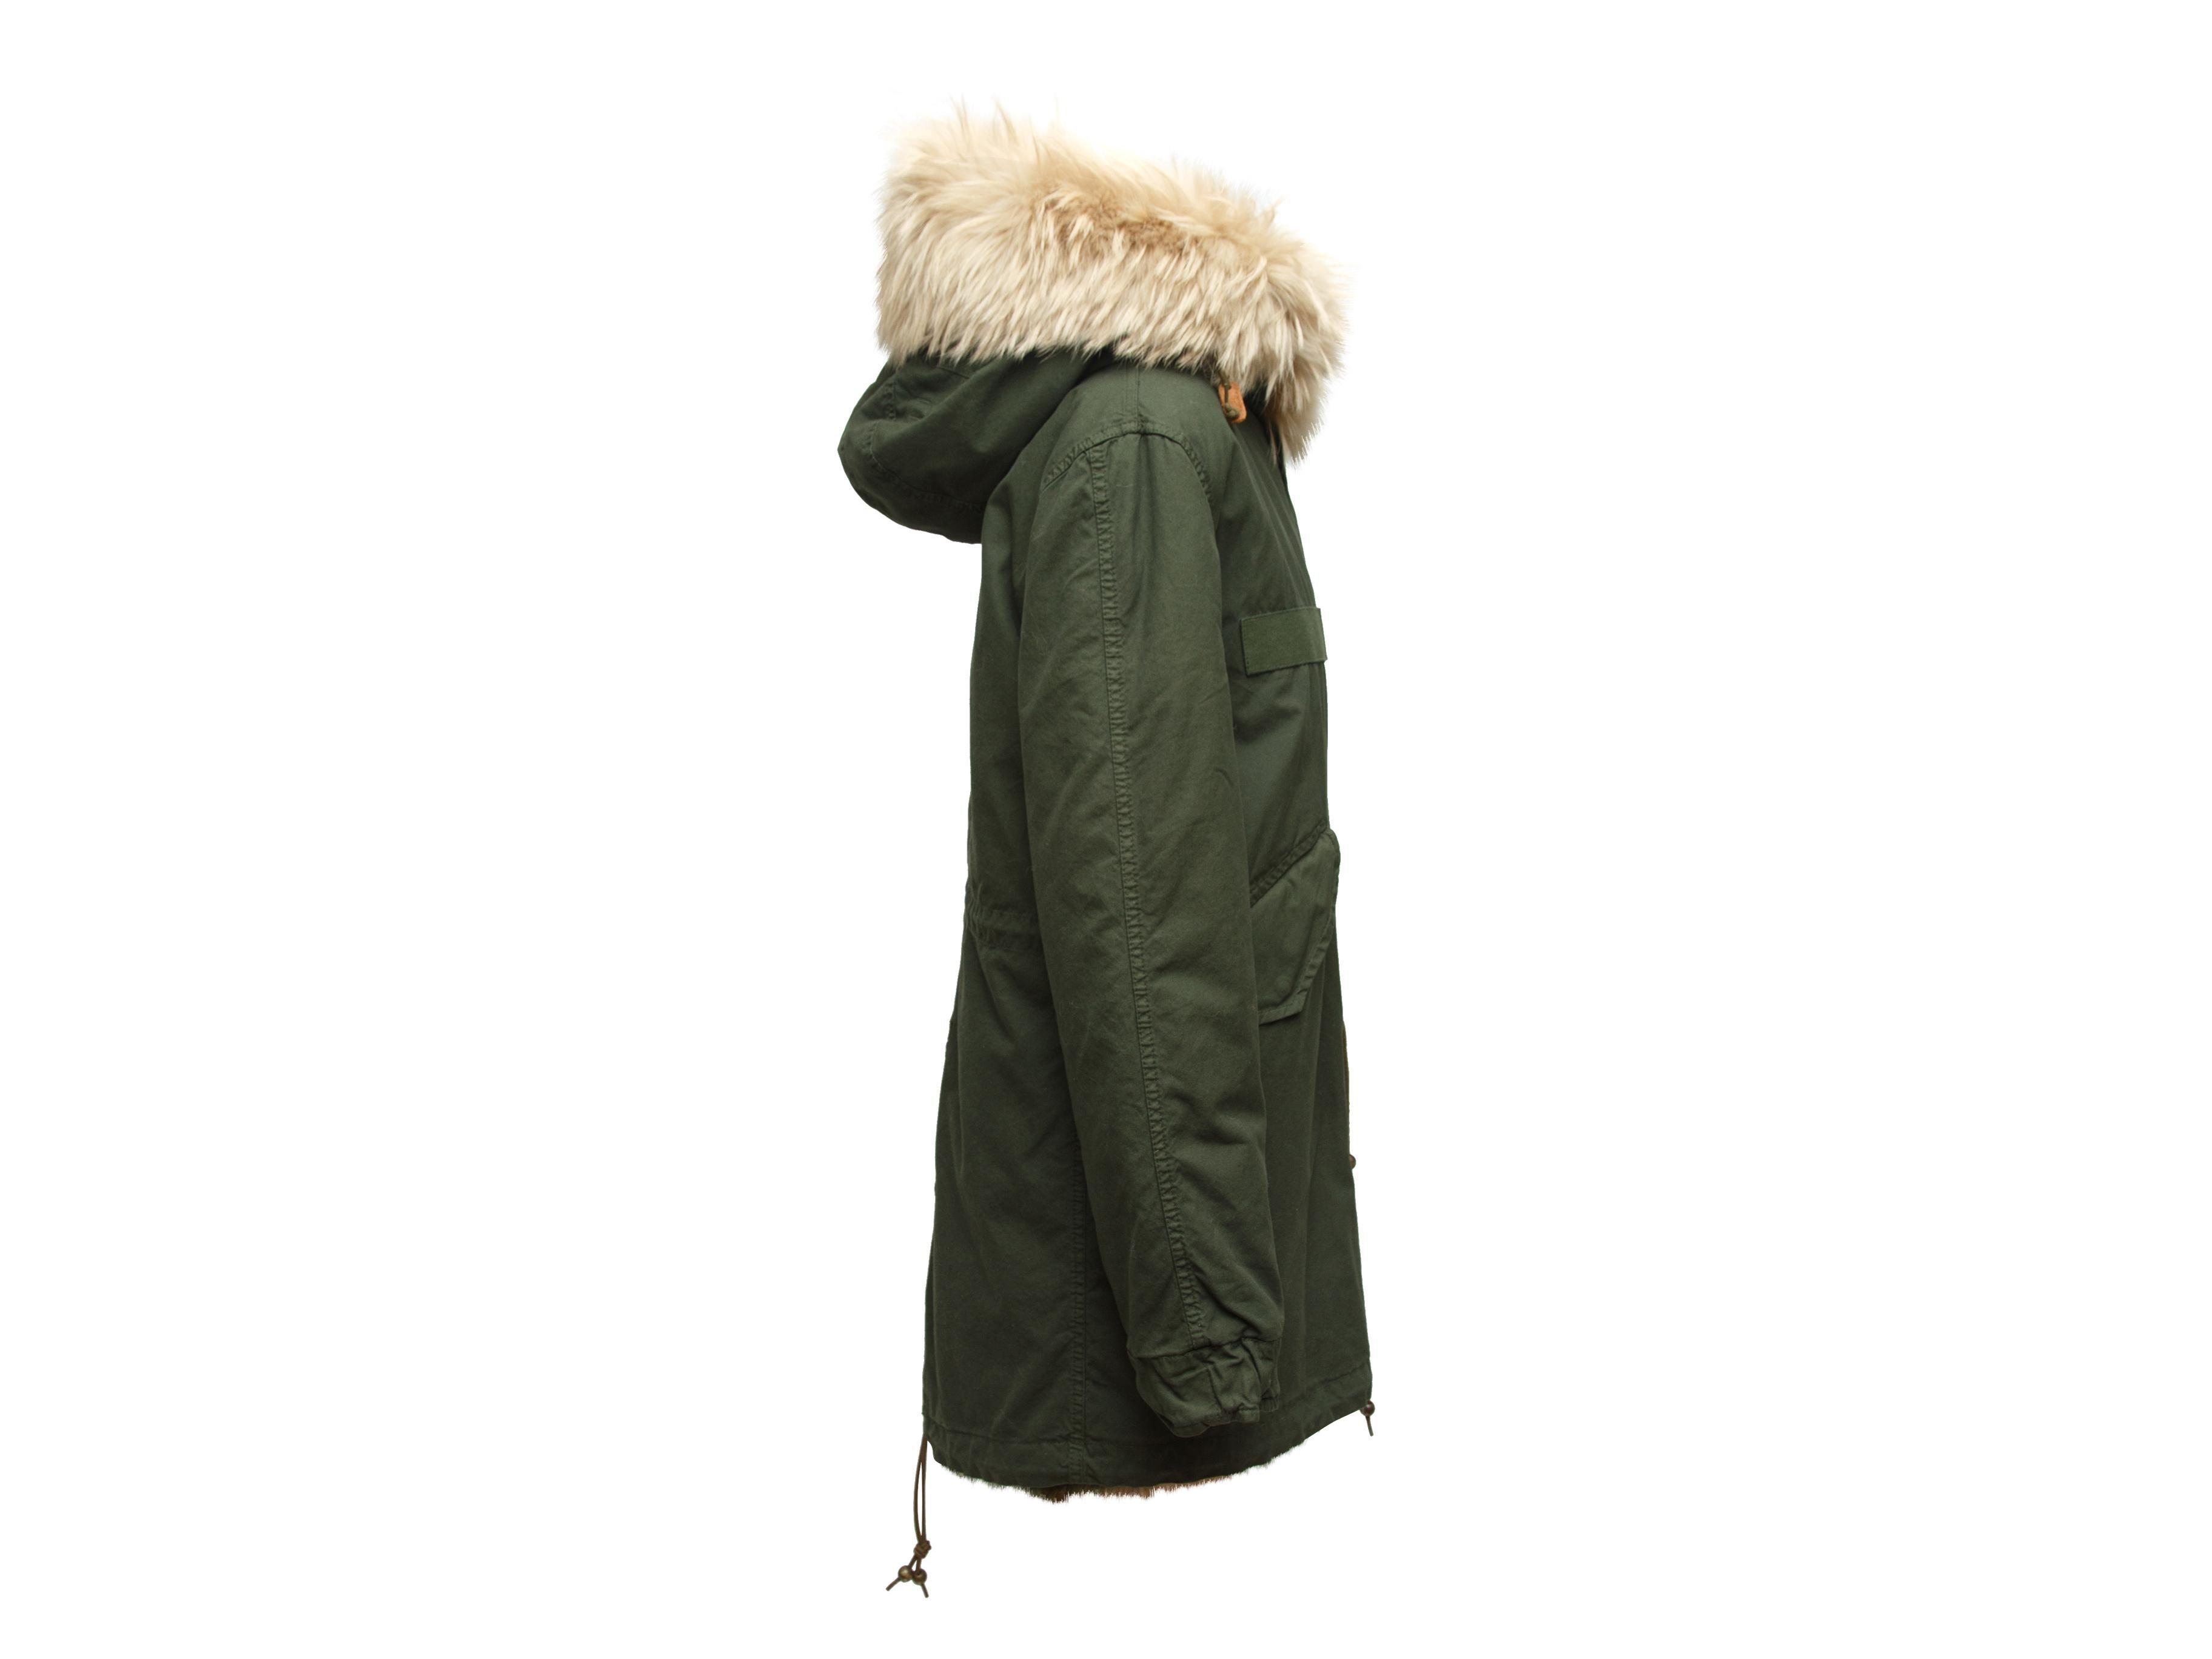 Product details: Olive green hooded coat by Mr and Mrs Italy. Fox fur trim at collar. Dual pockets. Drawstring at waist and hem. Zip closure at front. 41